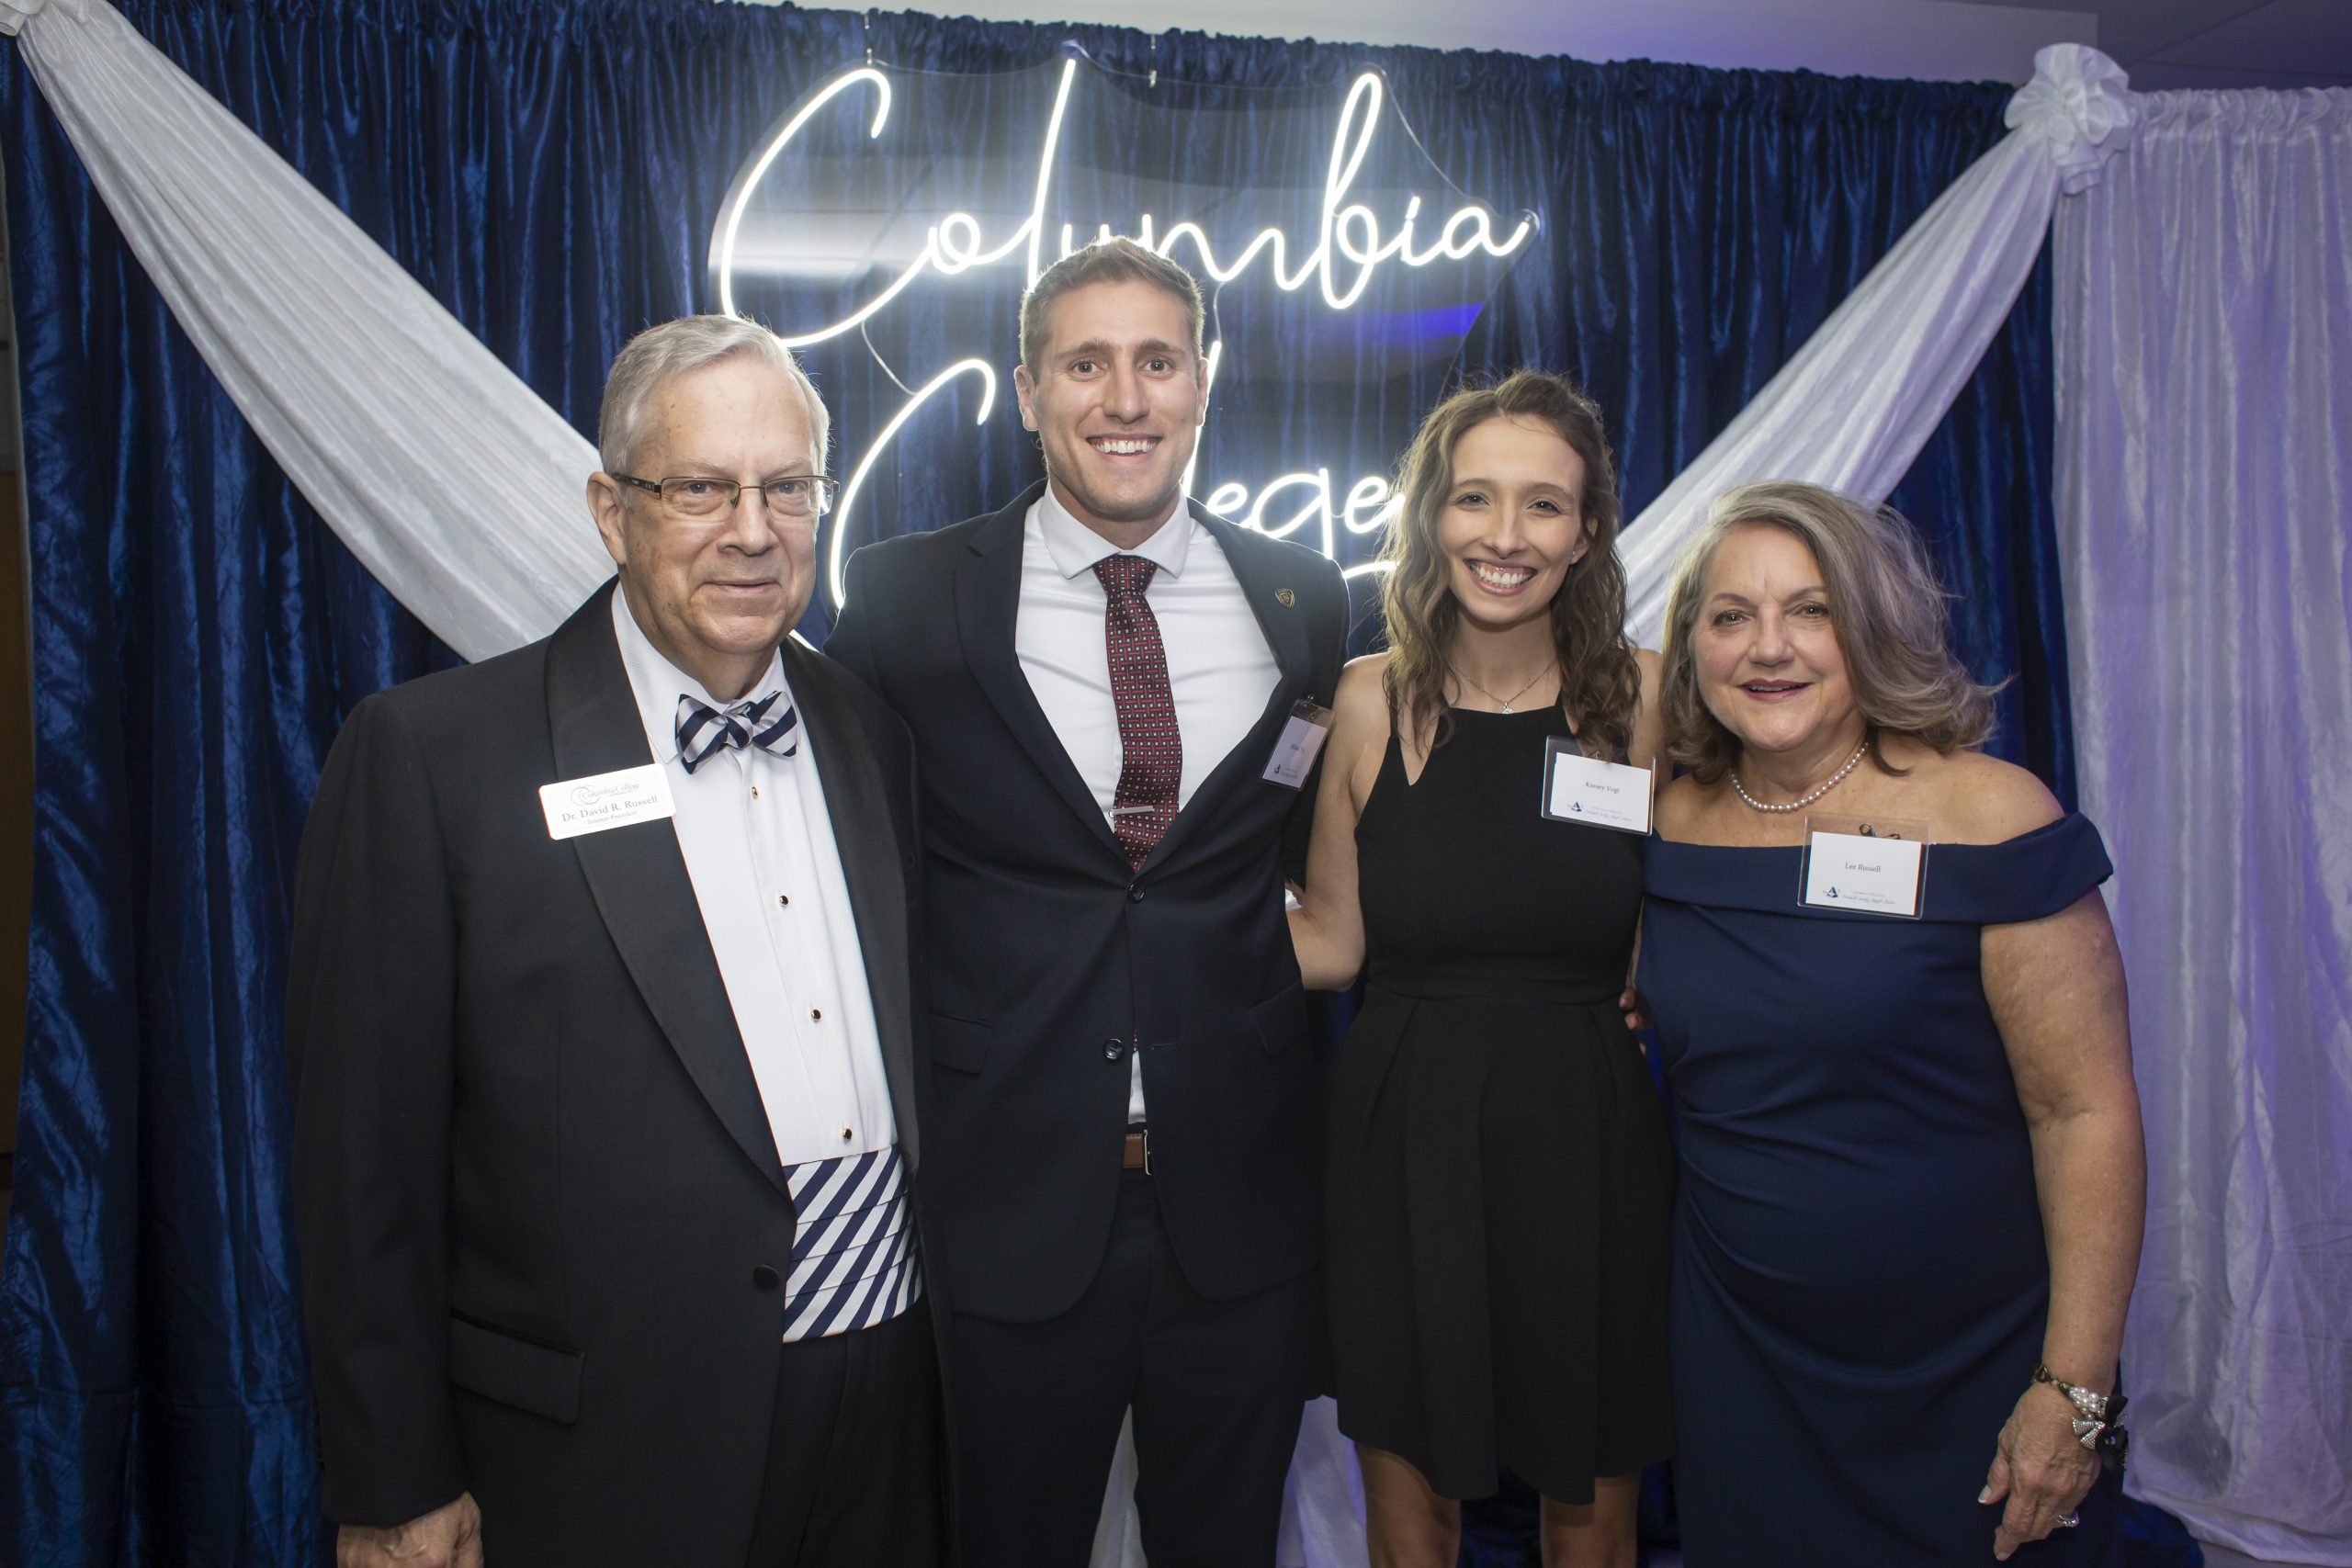 Michael Vogt posed with his wife, Kinsey, the President of Columbia College - Dr. Russell and his wife Lee Russell in front of a LED sign for Columbia College